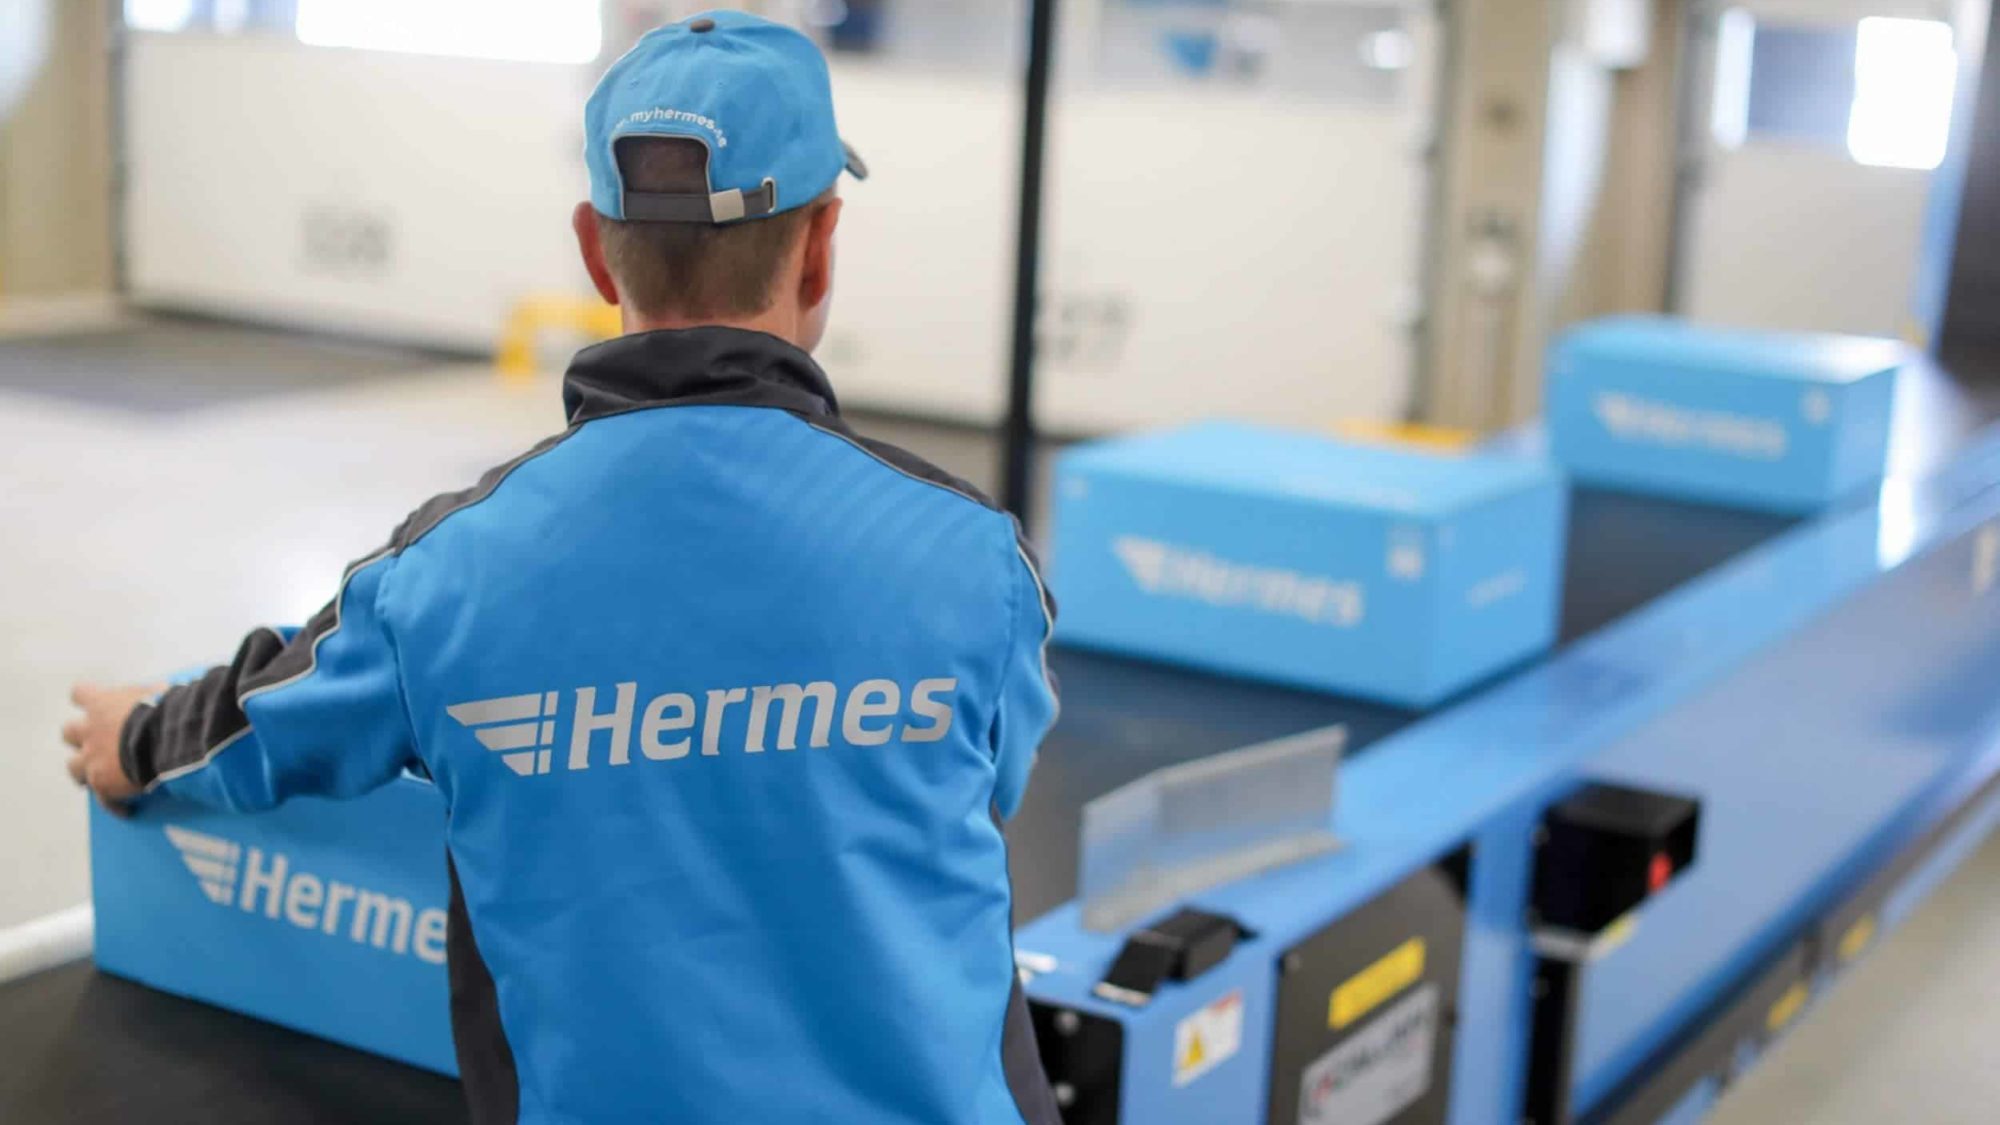 Hermes launches ‘What’s in the box’ to improve returns service